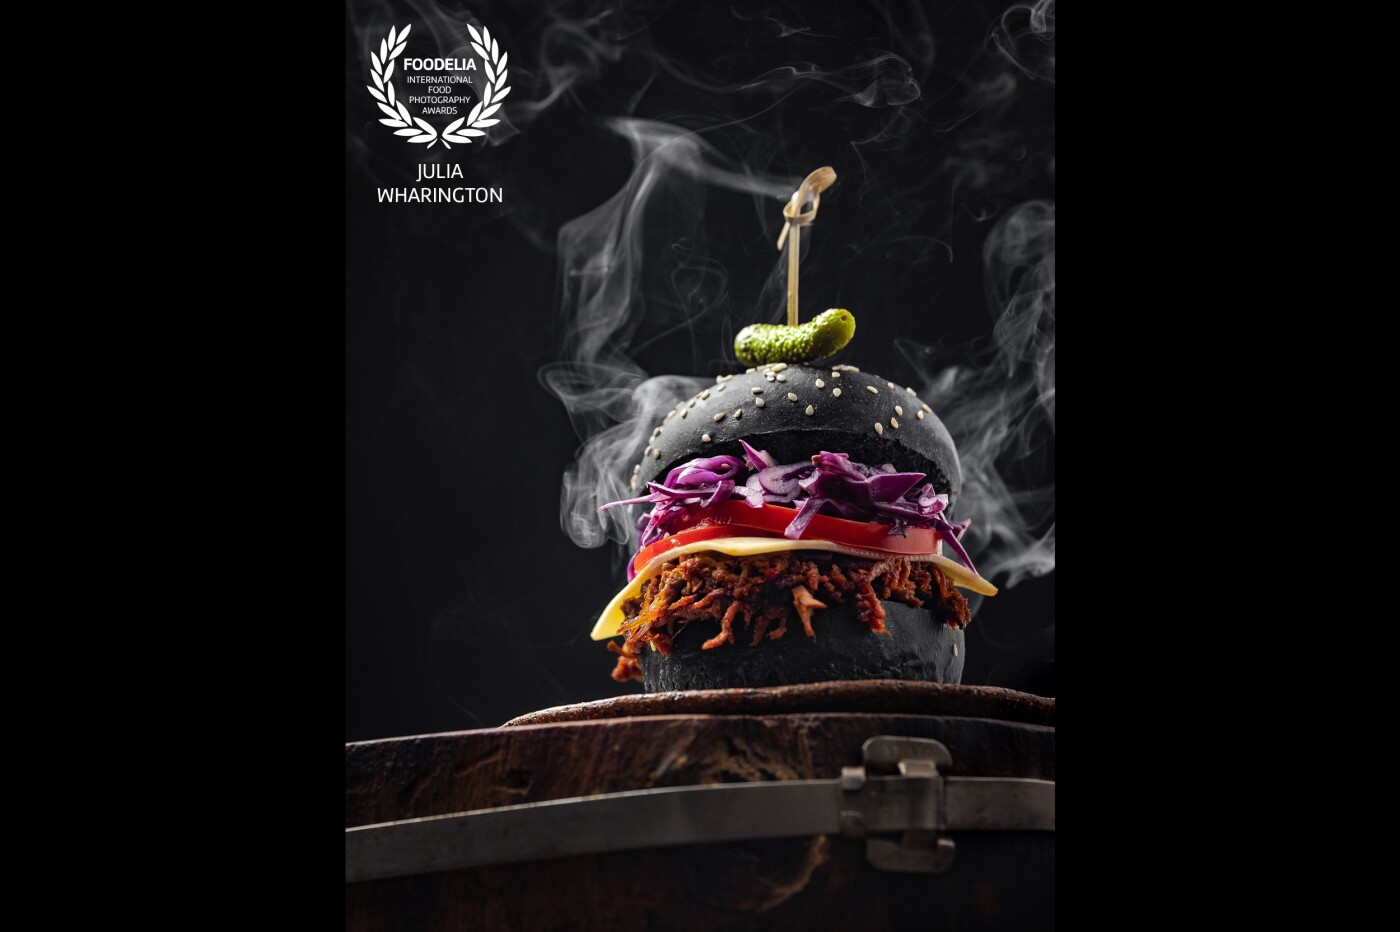 I think Lucifer would be happy to eat this smokin' brisket burger. This shot was inspired by those commercial bottle photography shots where the camera looks up at the subject. It really makes the product/food/subject look more powerful, don't you think?